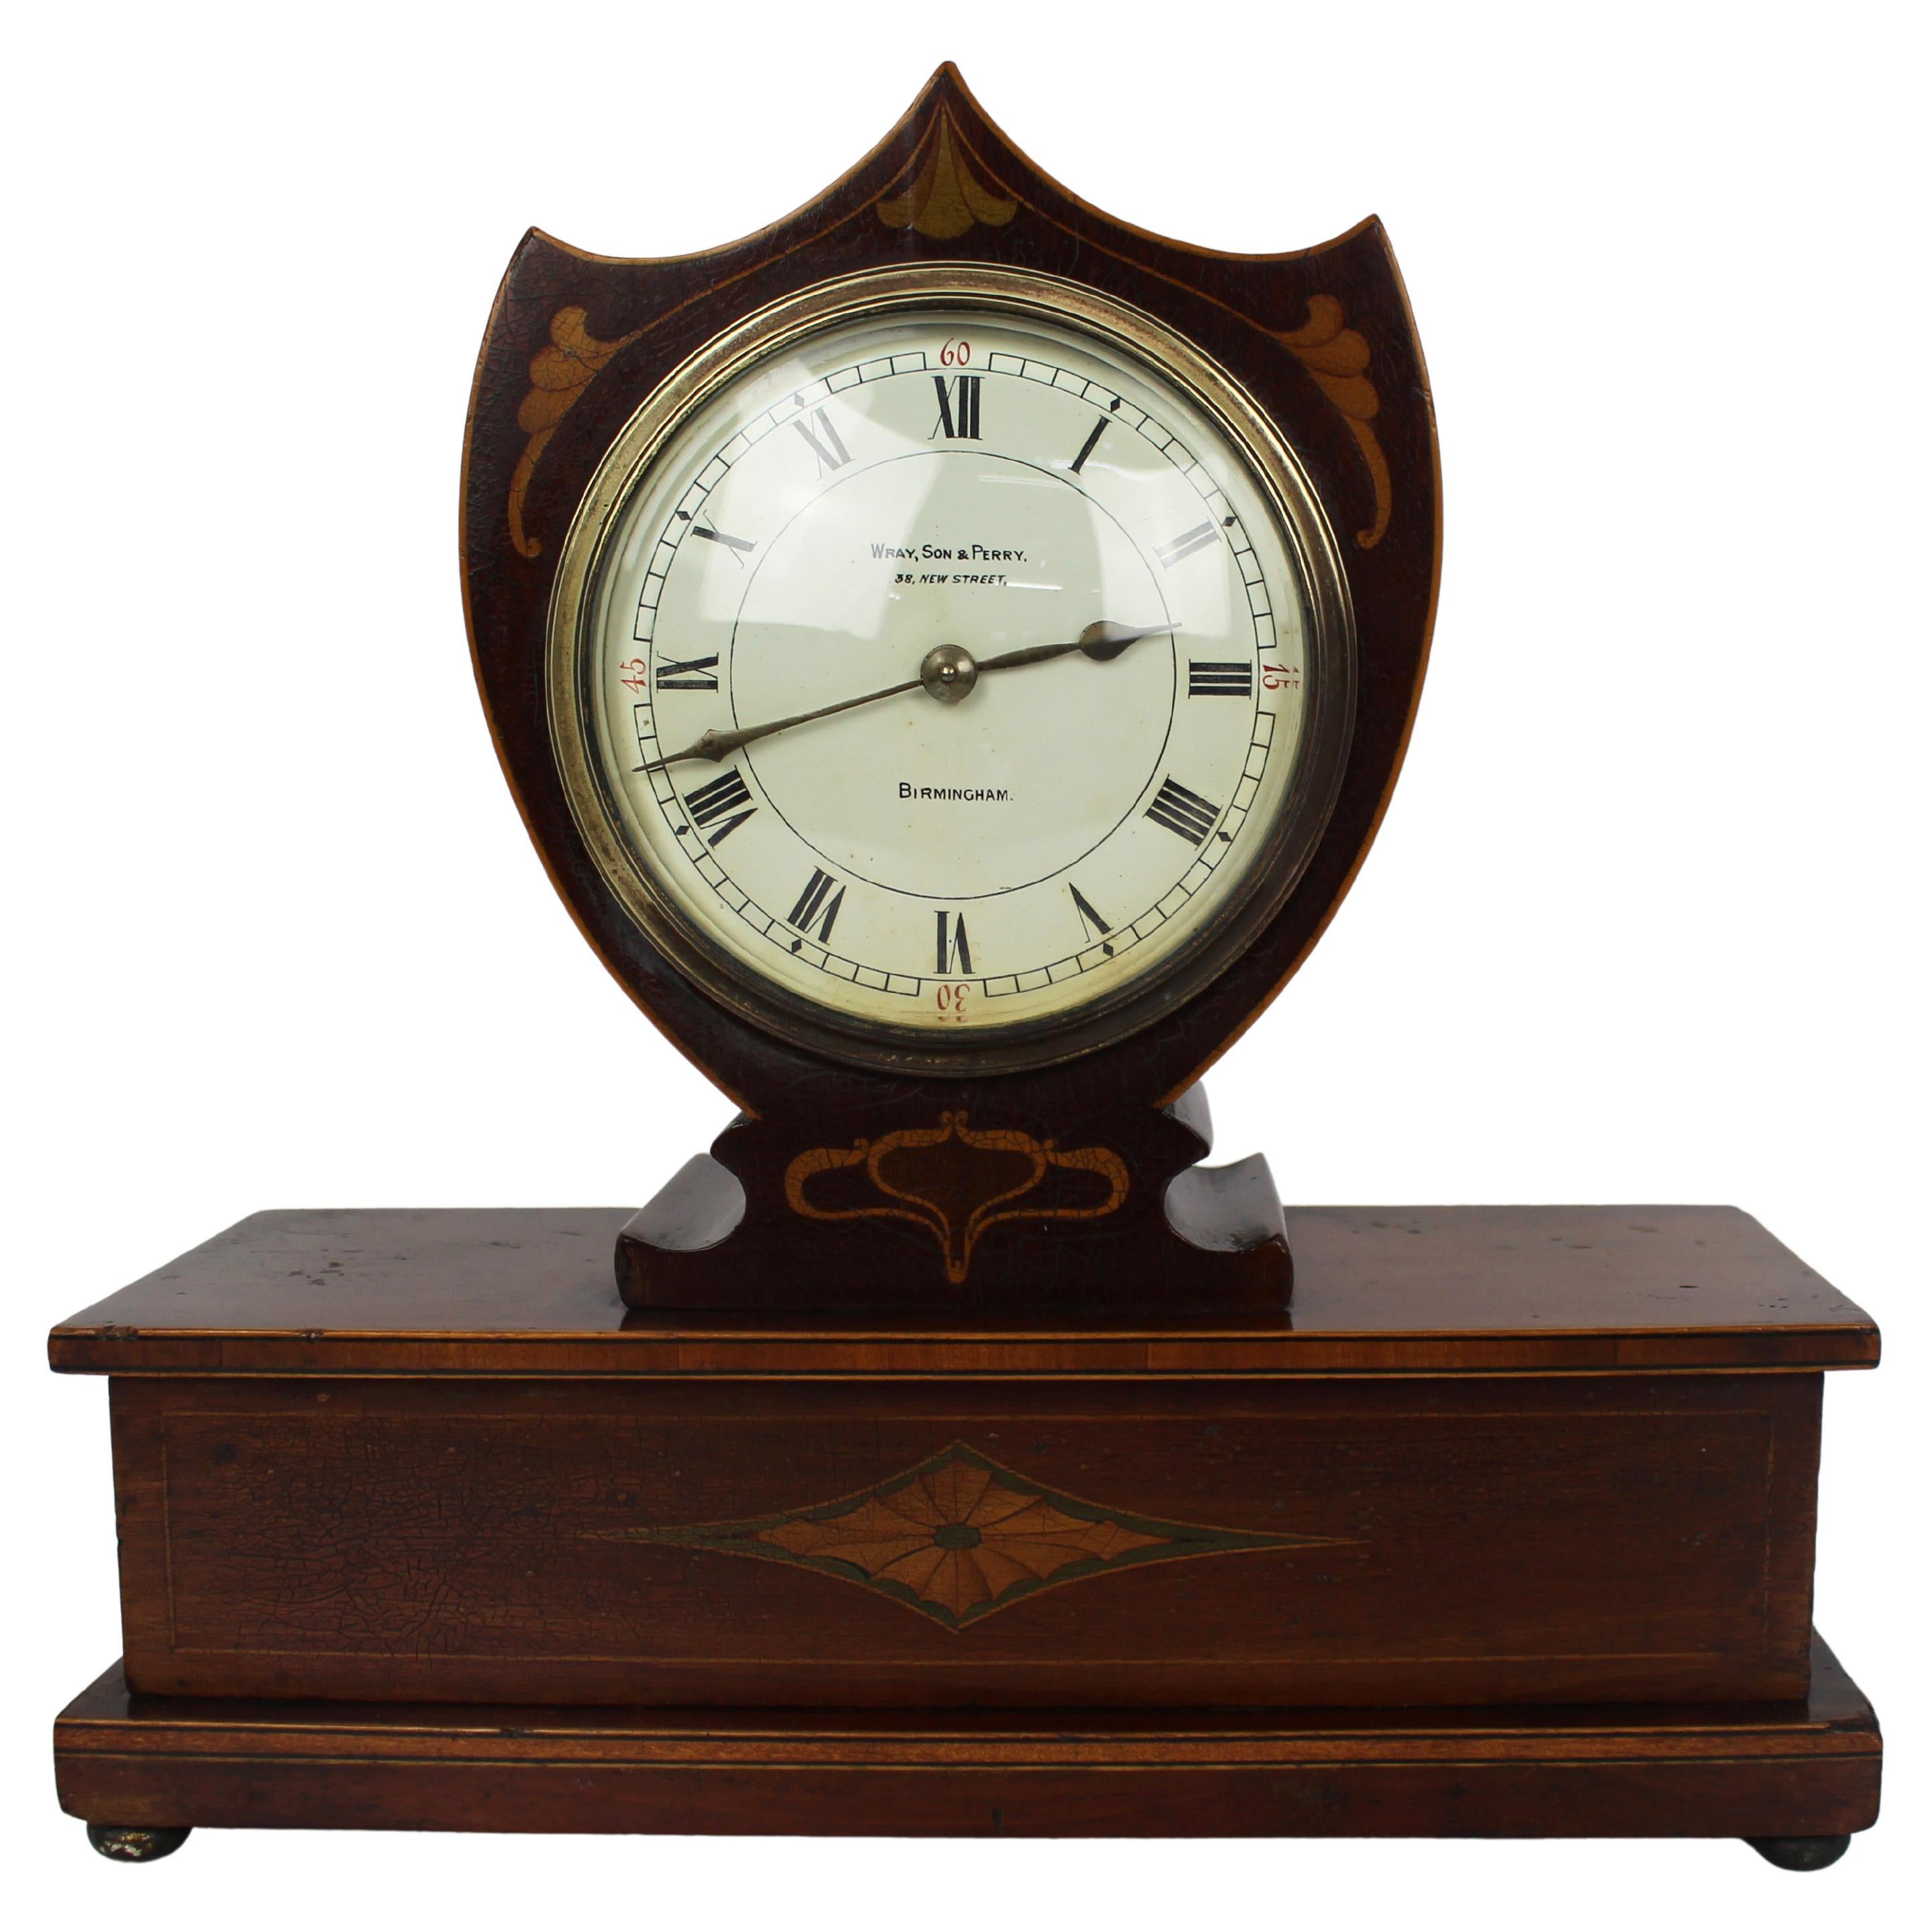 Elegant Inlaid Mahogany Mantle Clock by Wray, Son & Perry c.1900 For Sale